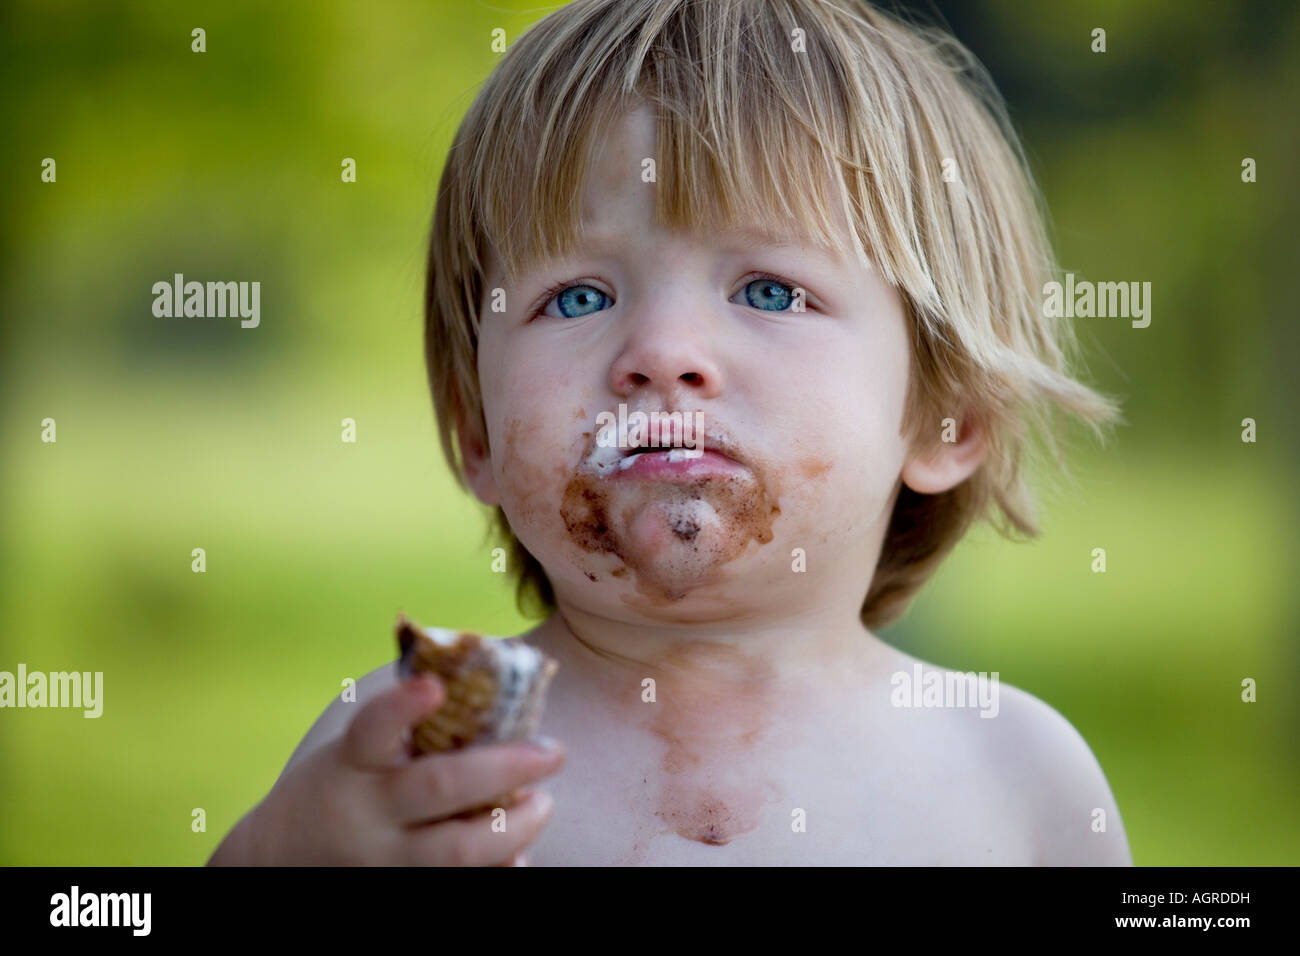 Little Boy eating ice cream cone Banque D'Images